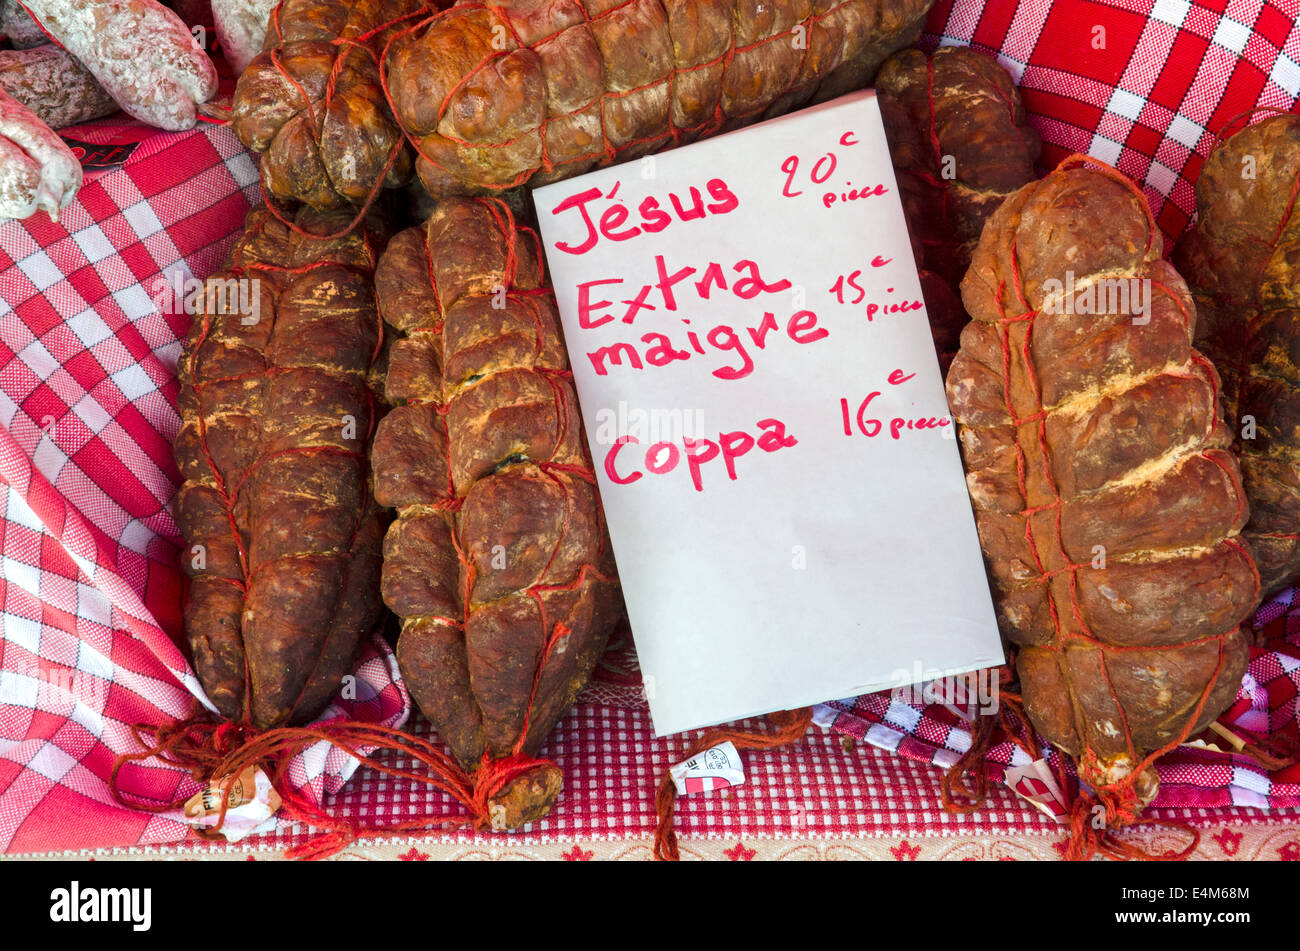 A selection of traditional French sausage on a stall at the Saturday market in Chamonix, Haute Savoie, France. Stock Photo